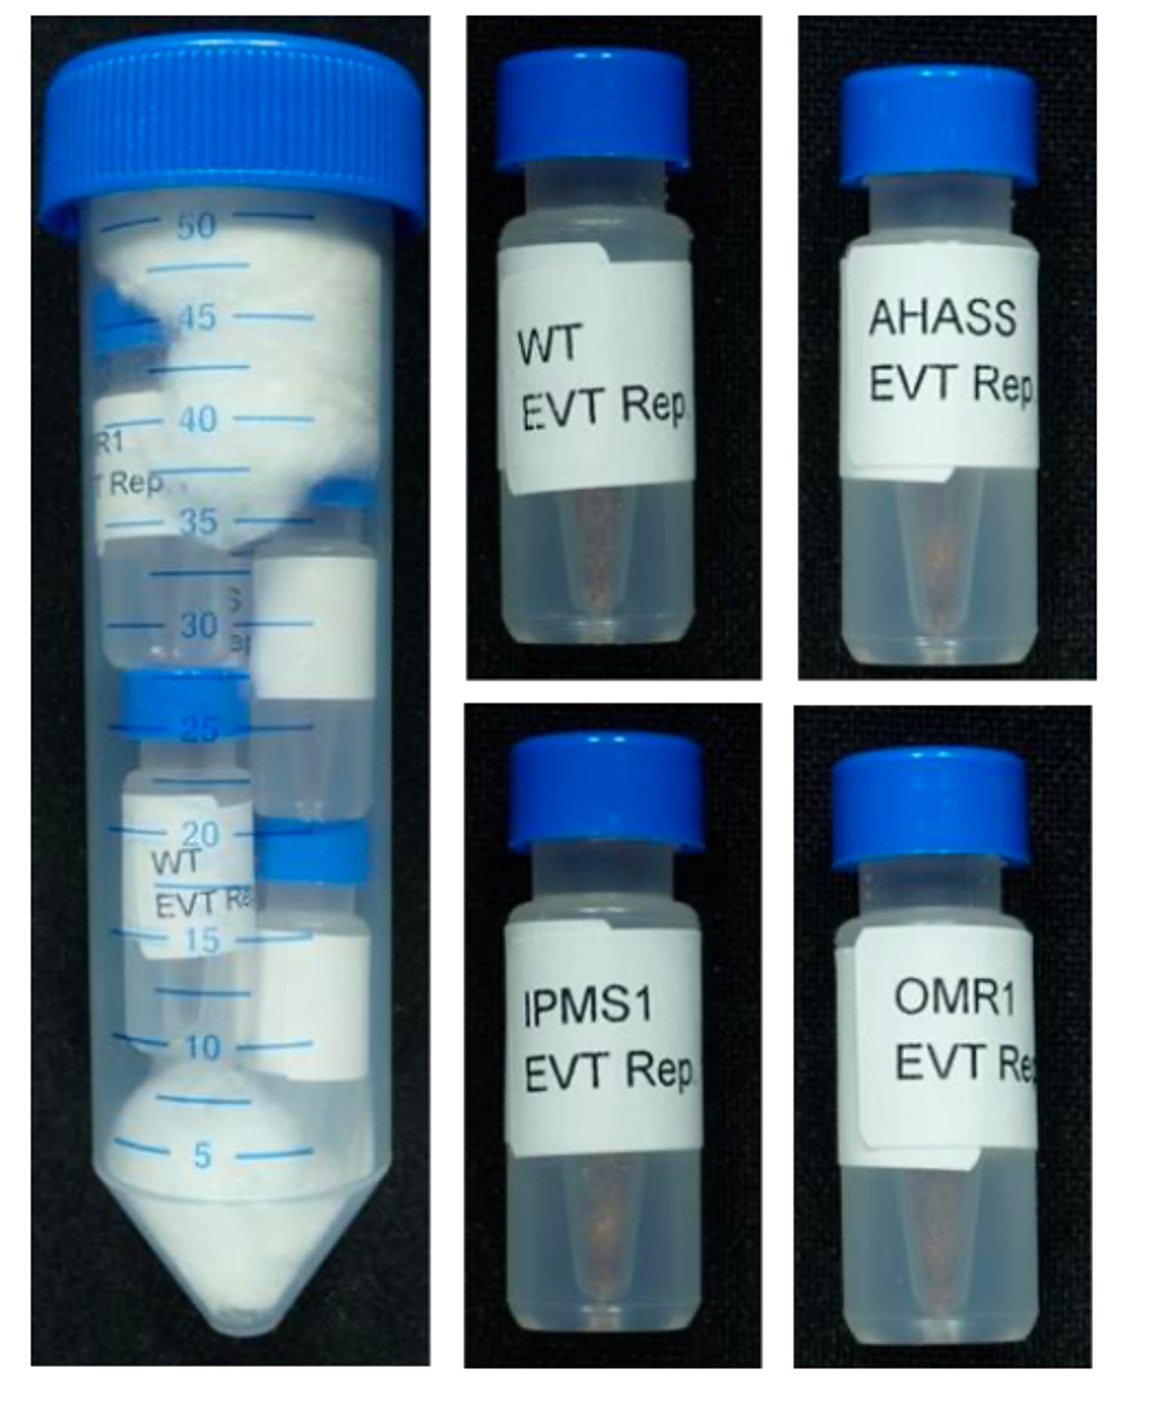 5 opaque, plastic vials with blue lids. The left side has a large vial which fits the four smaller vials. The 4 smaller vials have a single tube each including a brown substance.